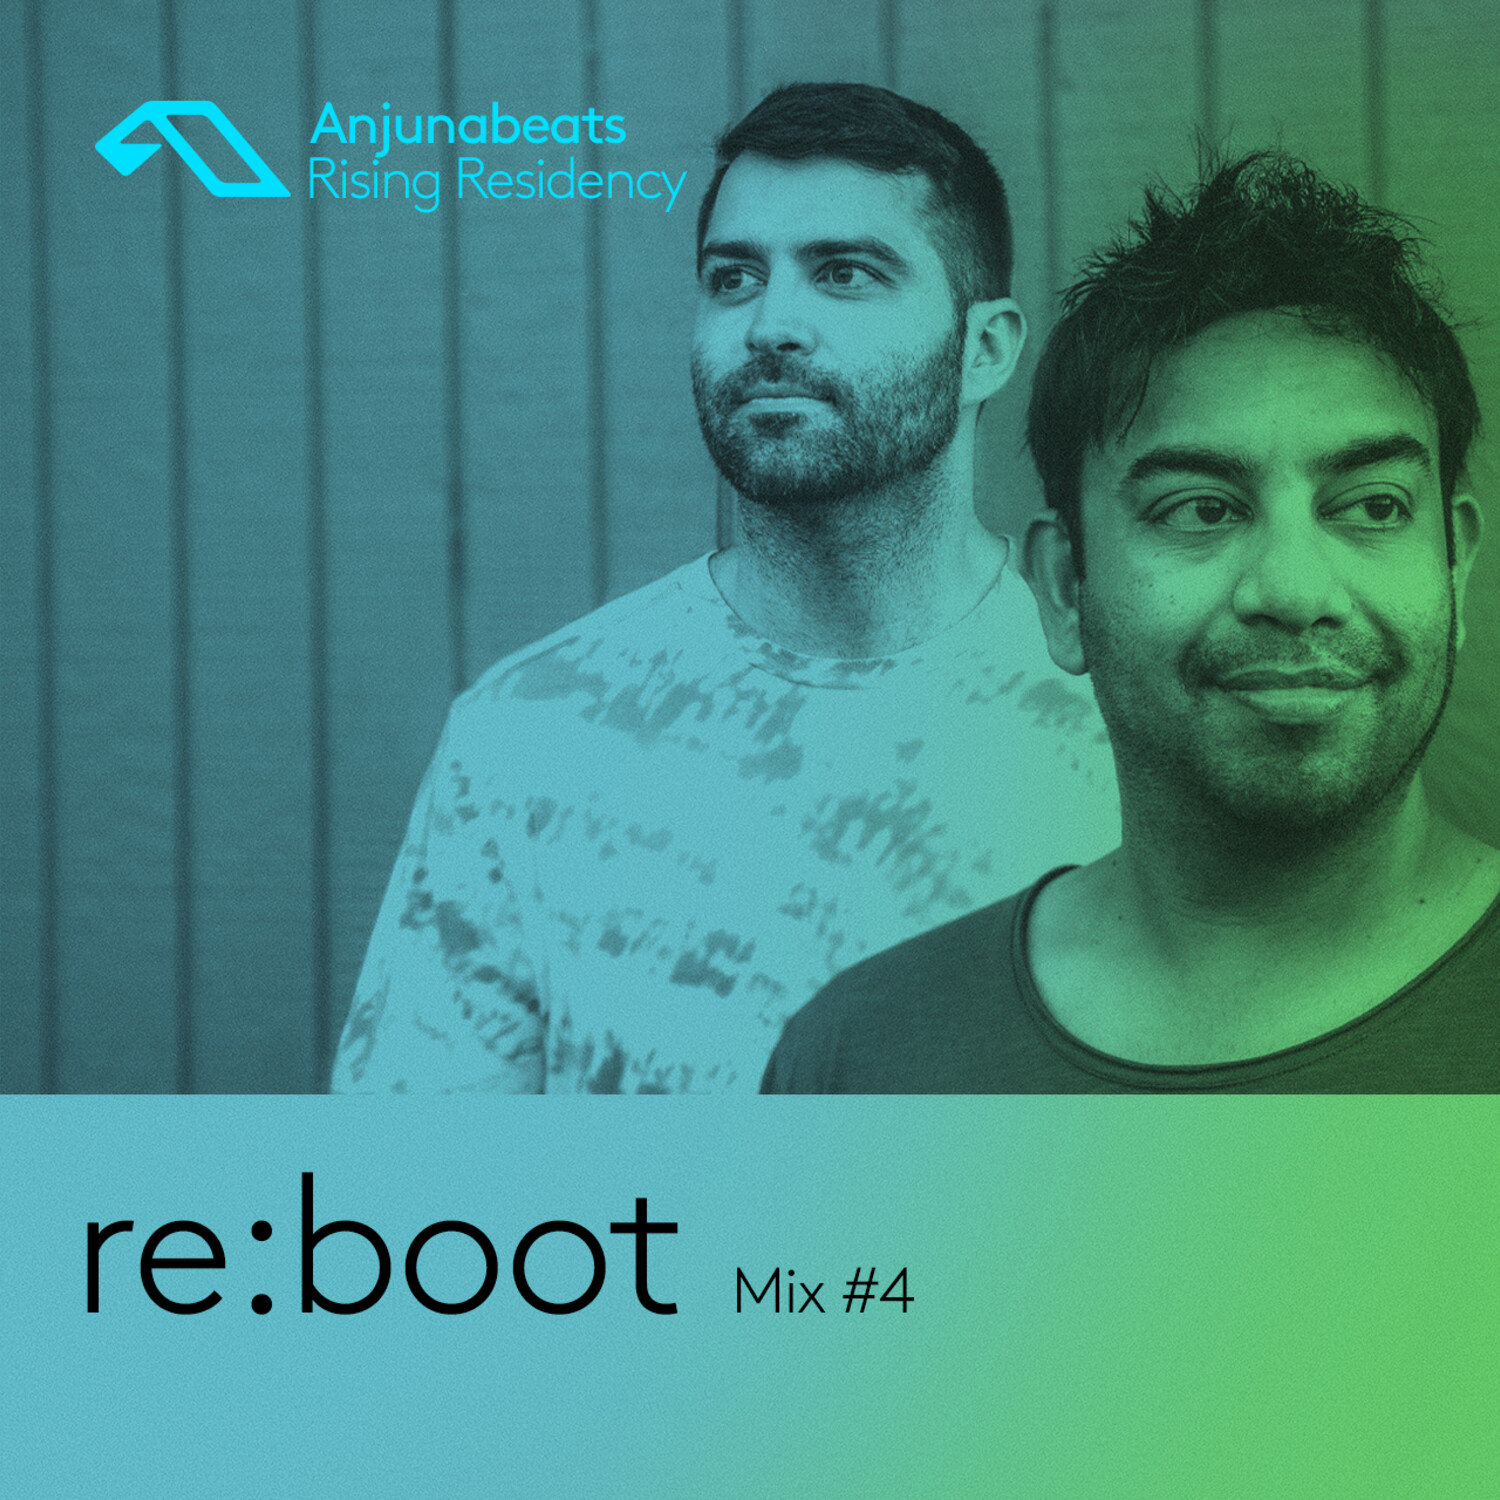 The Anjunabeats Rising Residency with re:boot #4